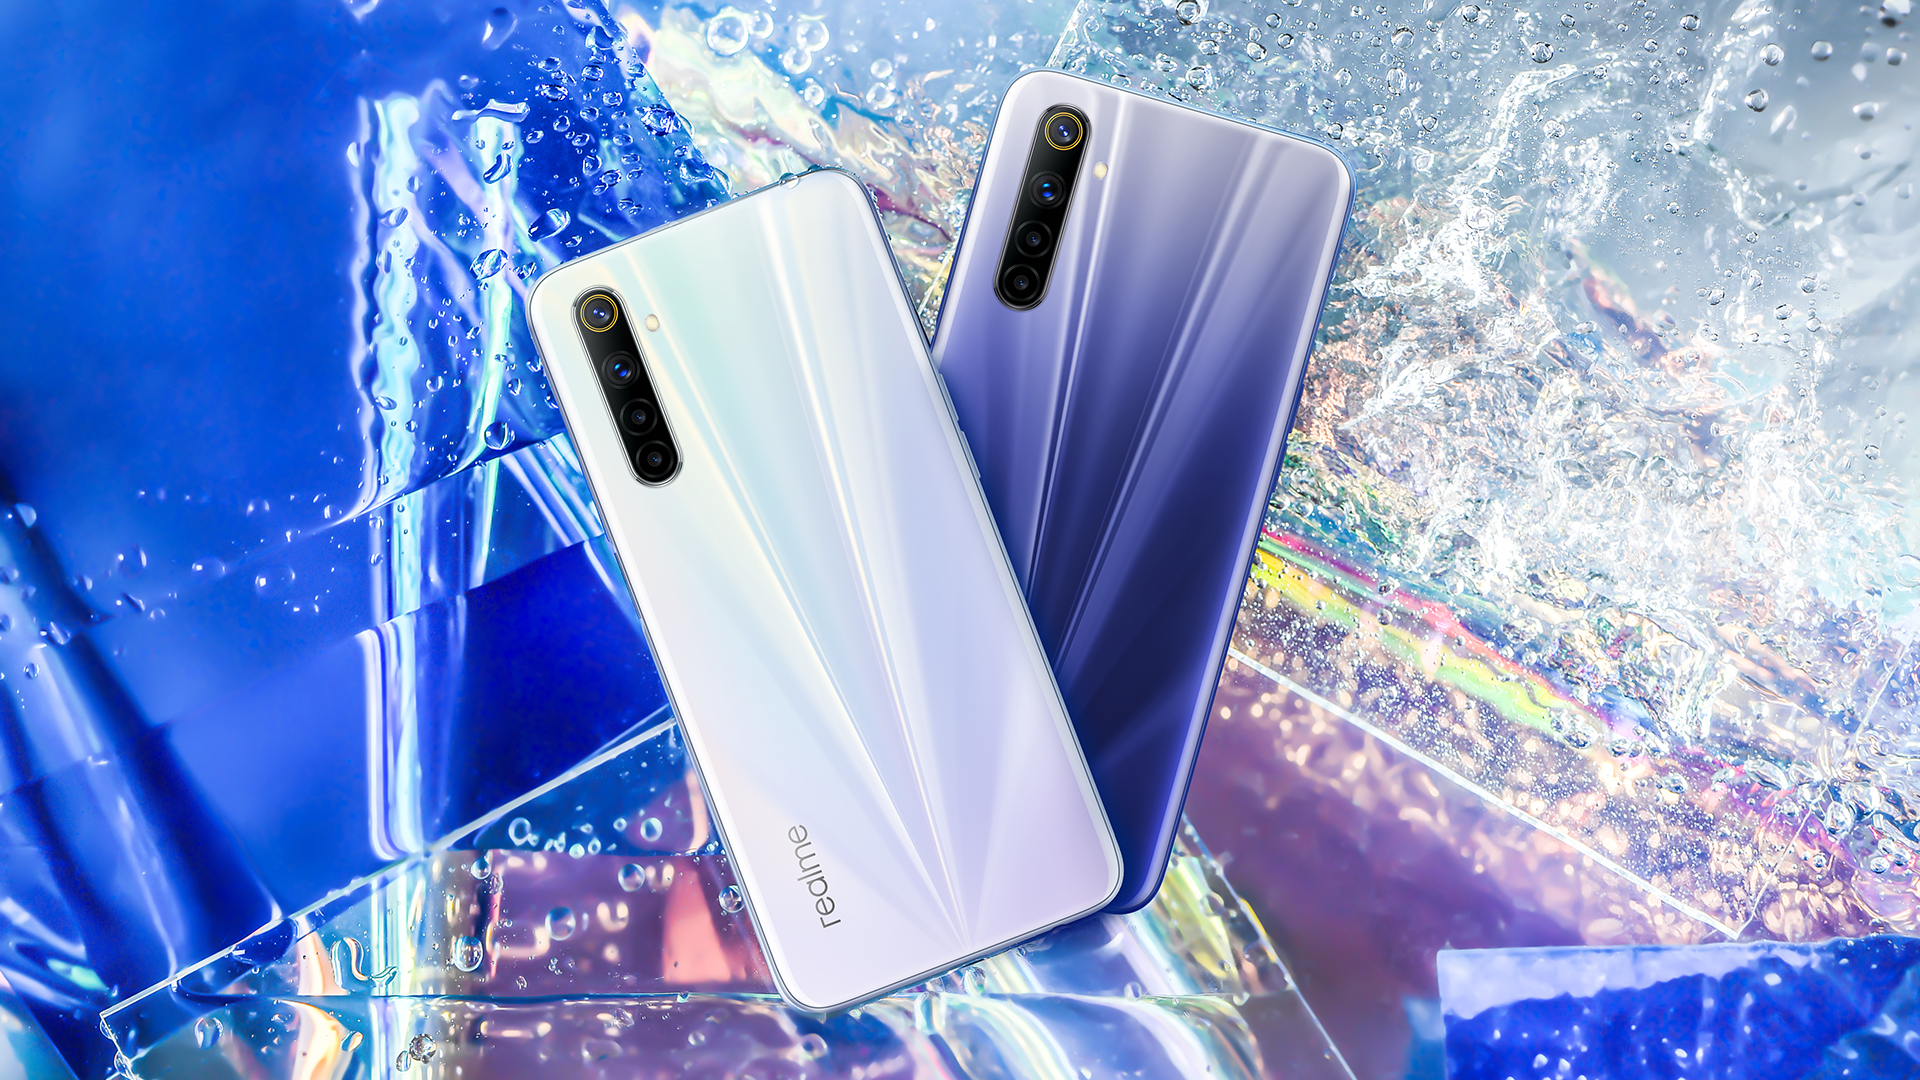 Realme 6 Arrives This Week Boasts 90hz Display And Quad Camera For Only Au 469 Techradar